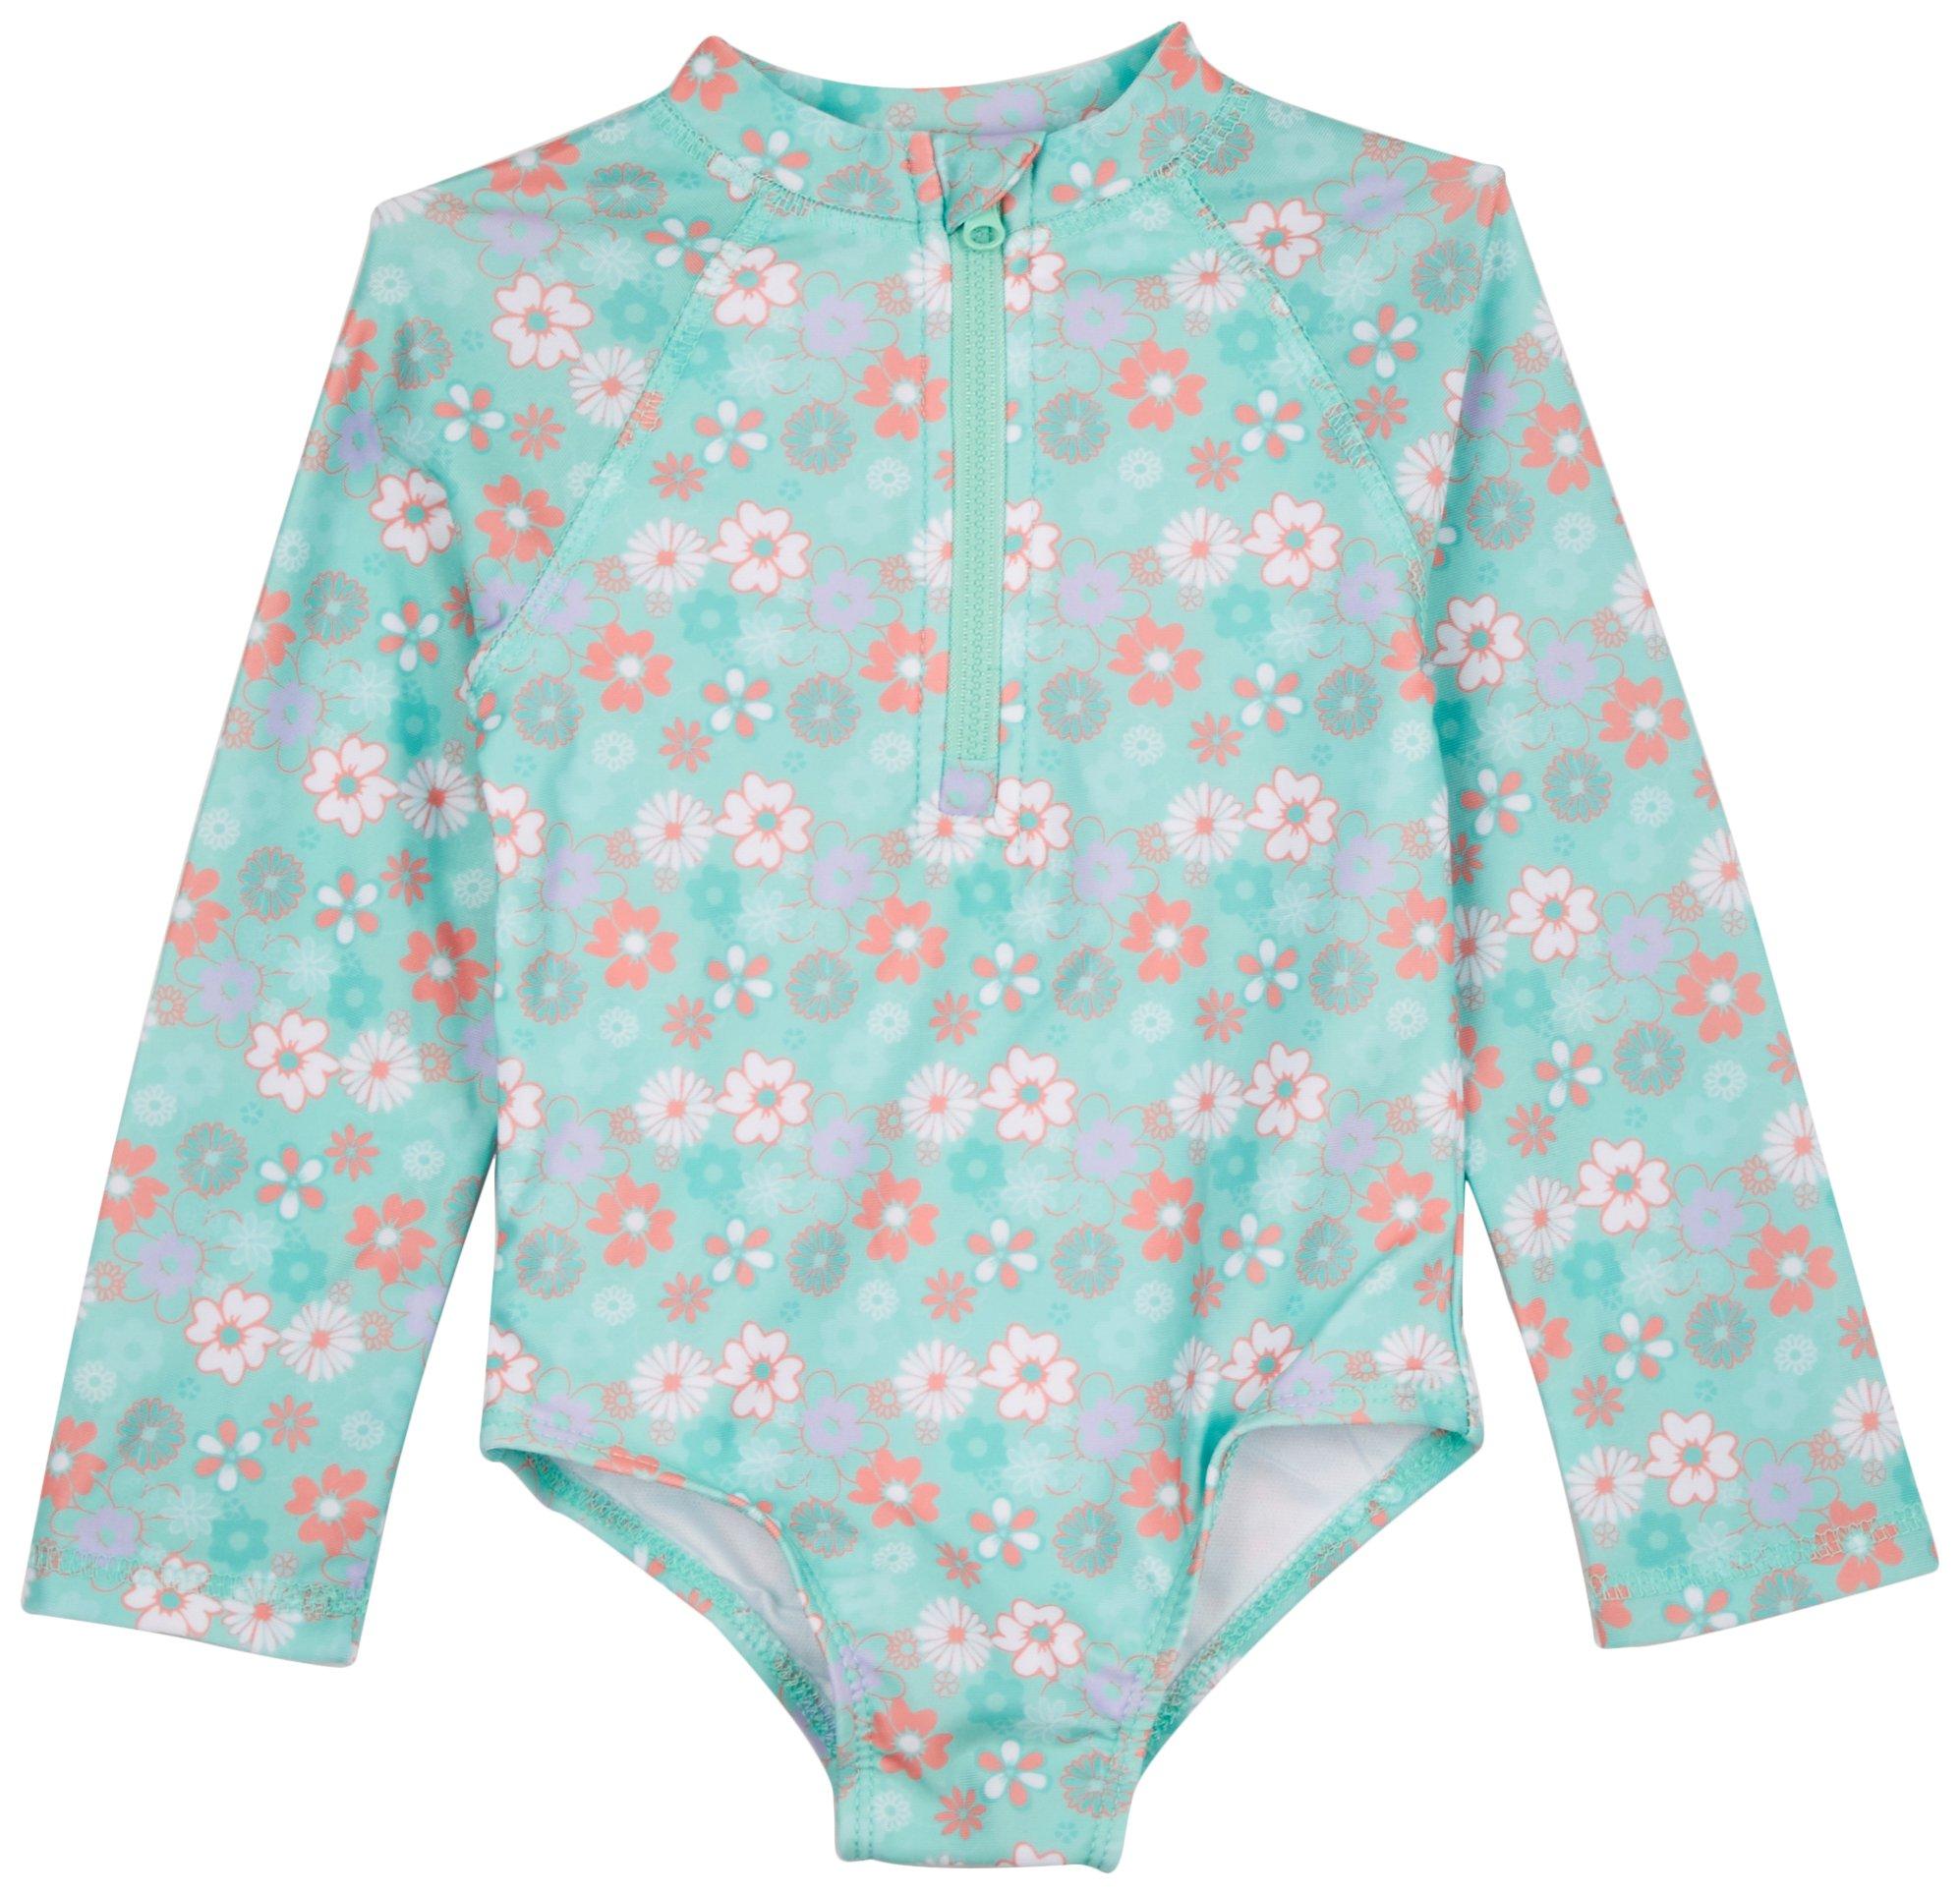 Baby Girls One Pc. Soft Floral Print Swimsuit